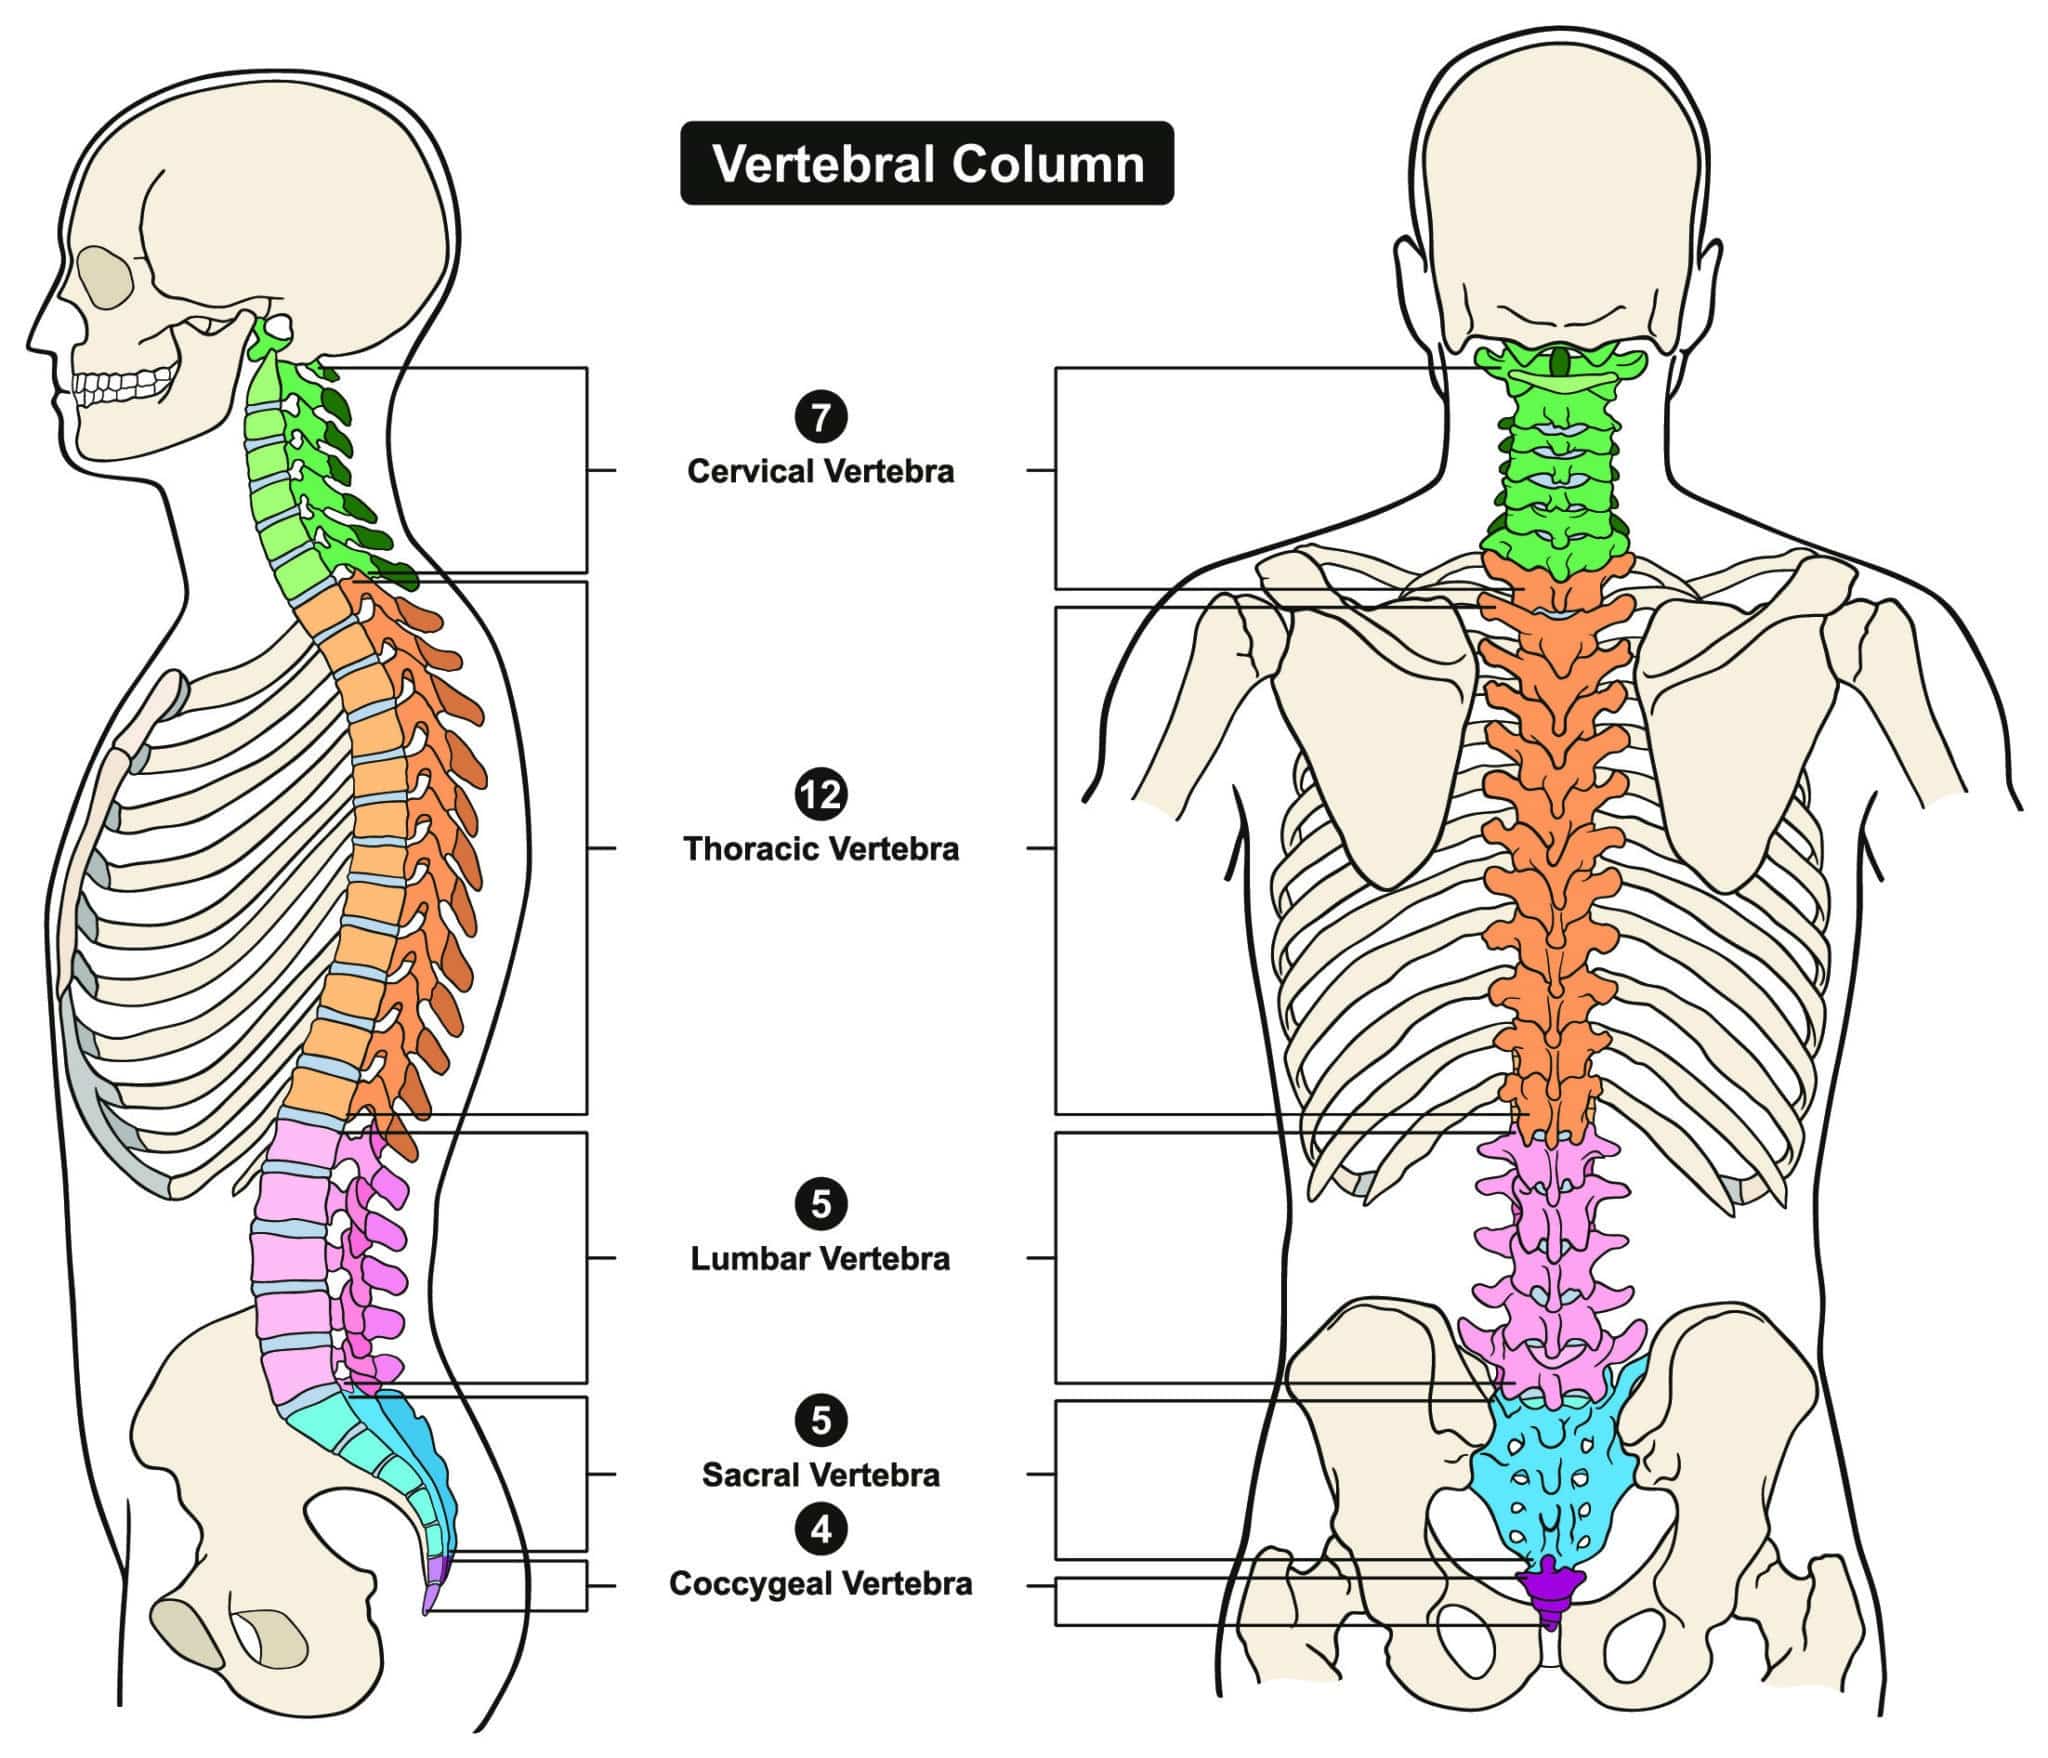 Unlock Your Spine ReviewsLike An Expert. Follow These 5 Steps To Get There